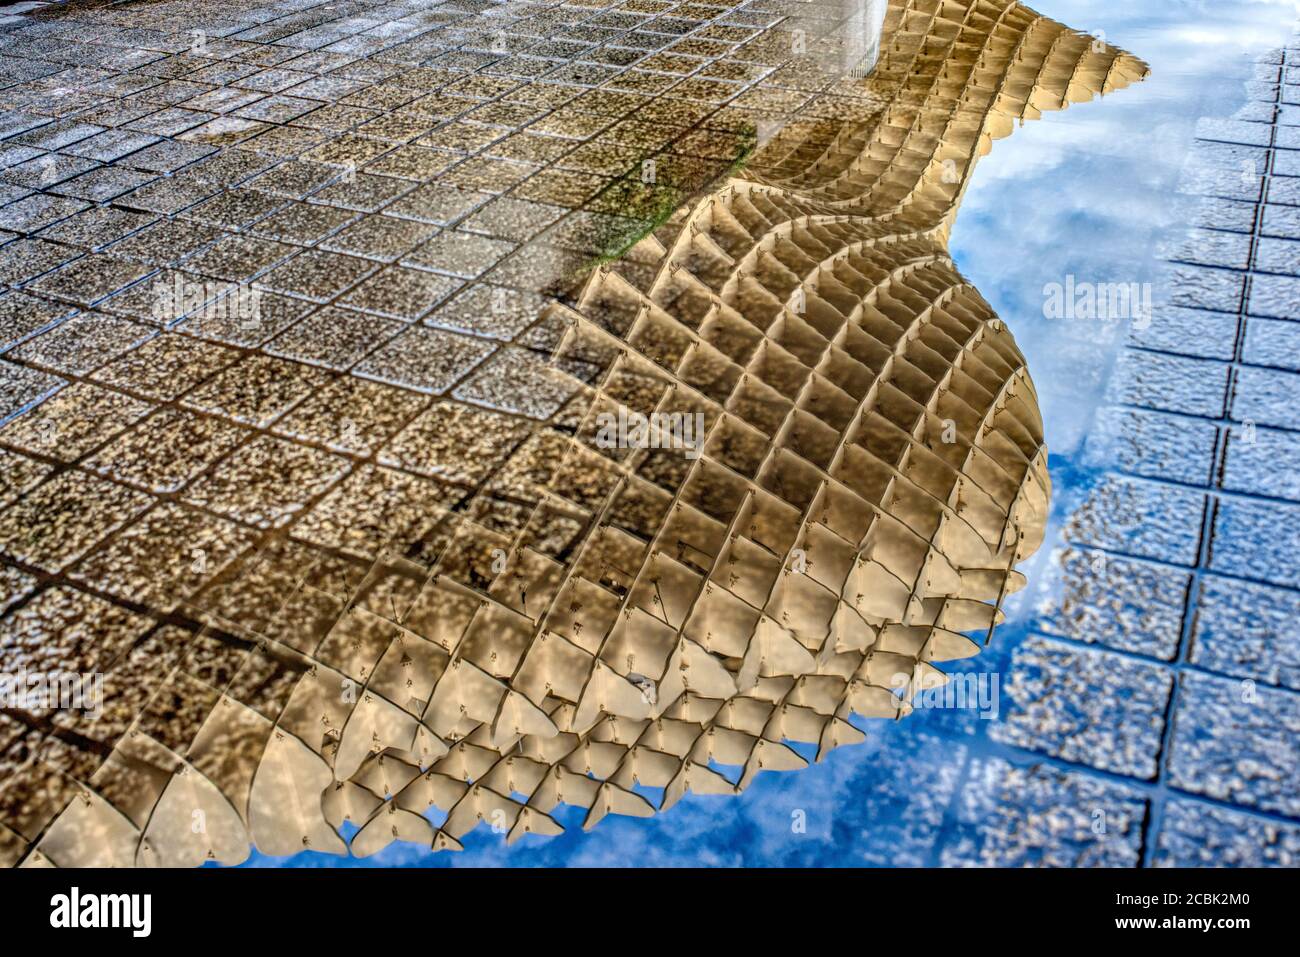 Metropol Parasol structure reflected on a rain puddle, Seville, Spain Stock Photo